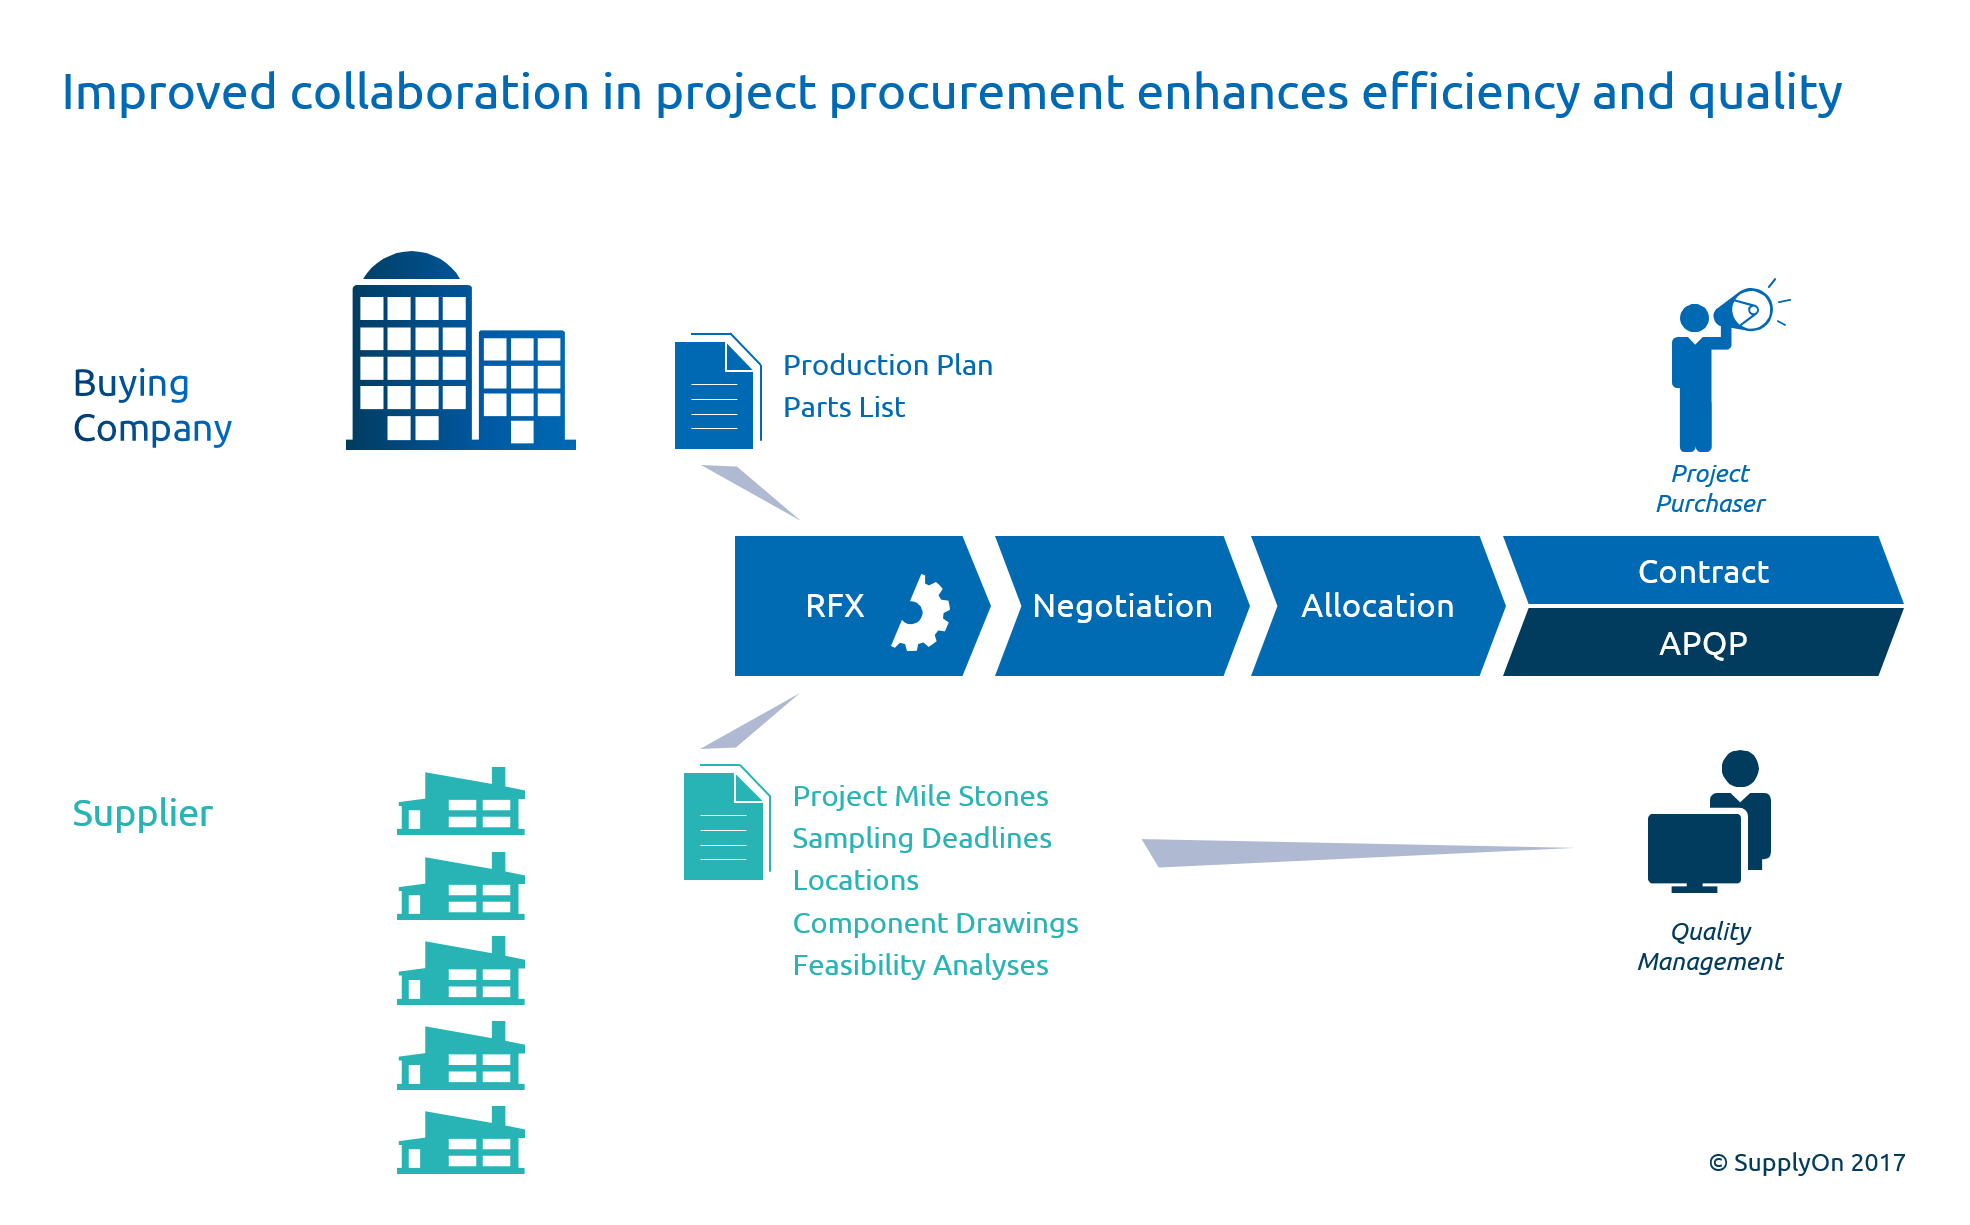 In project procurement, a close collaboration with quality management pays off